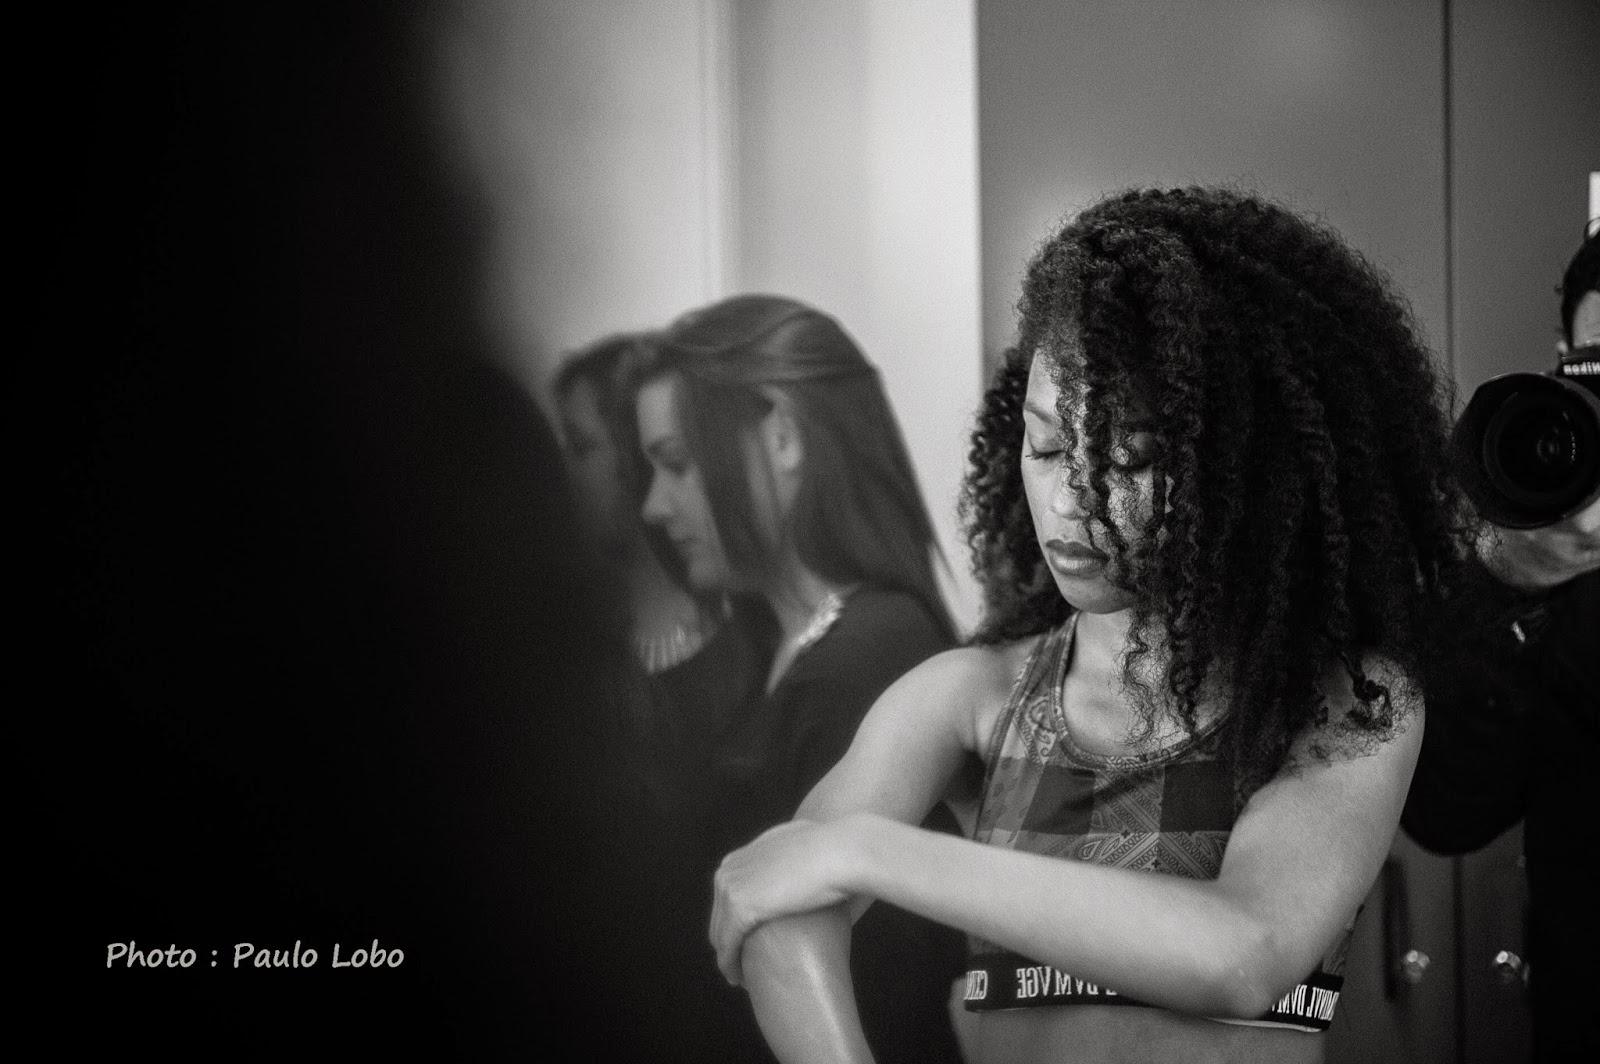 Backstage dreams - Miss Portugal au Luxembourg 2015